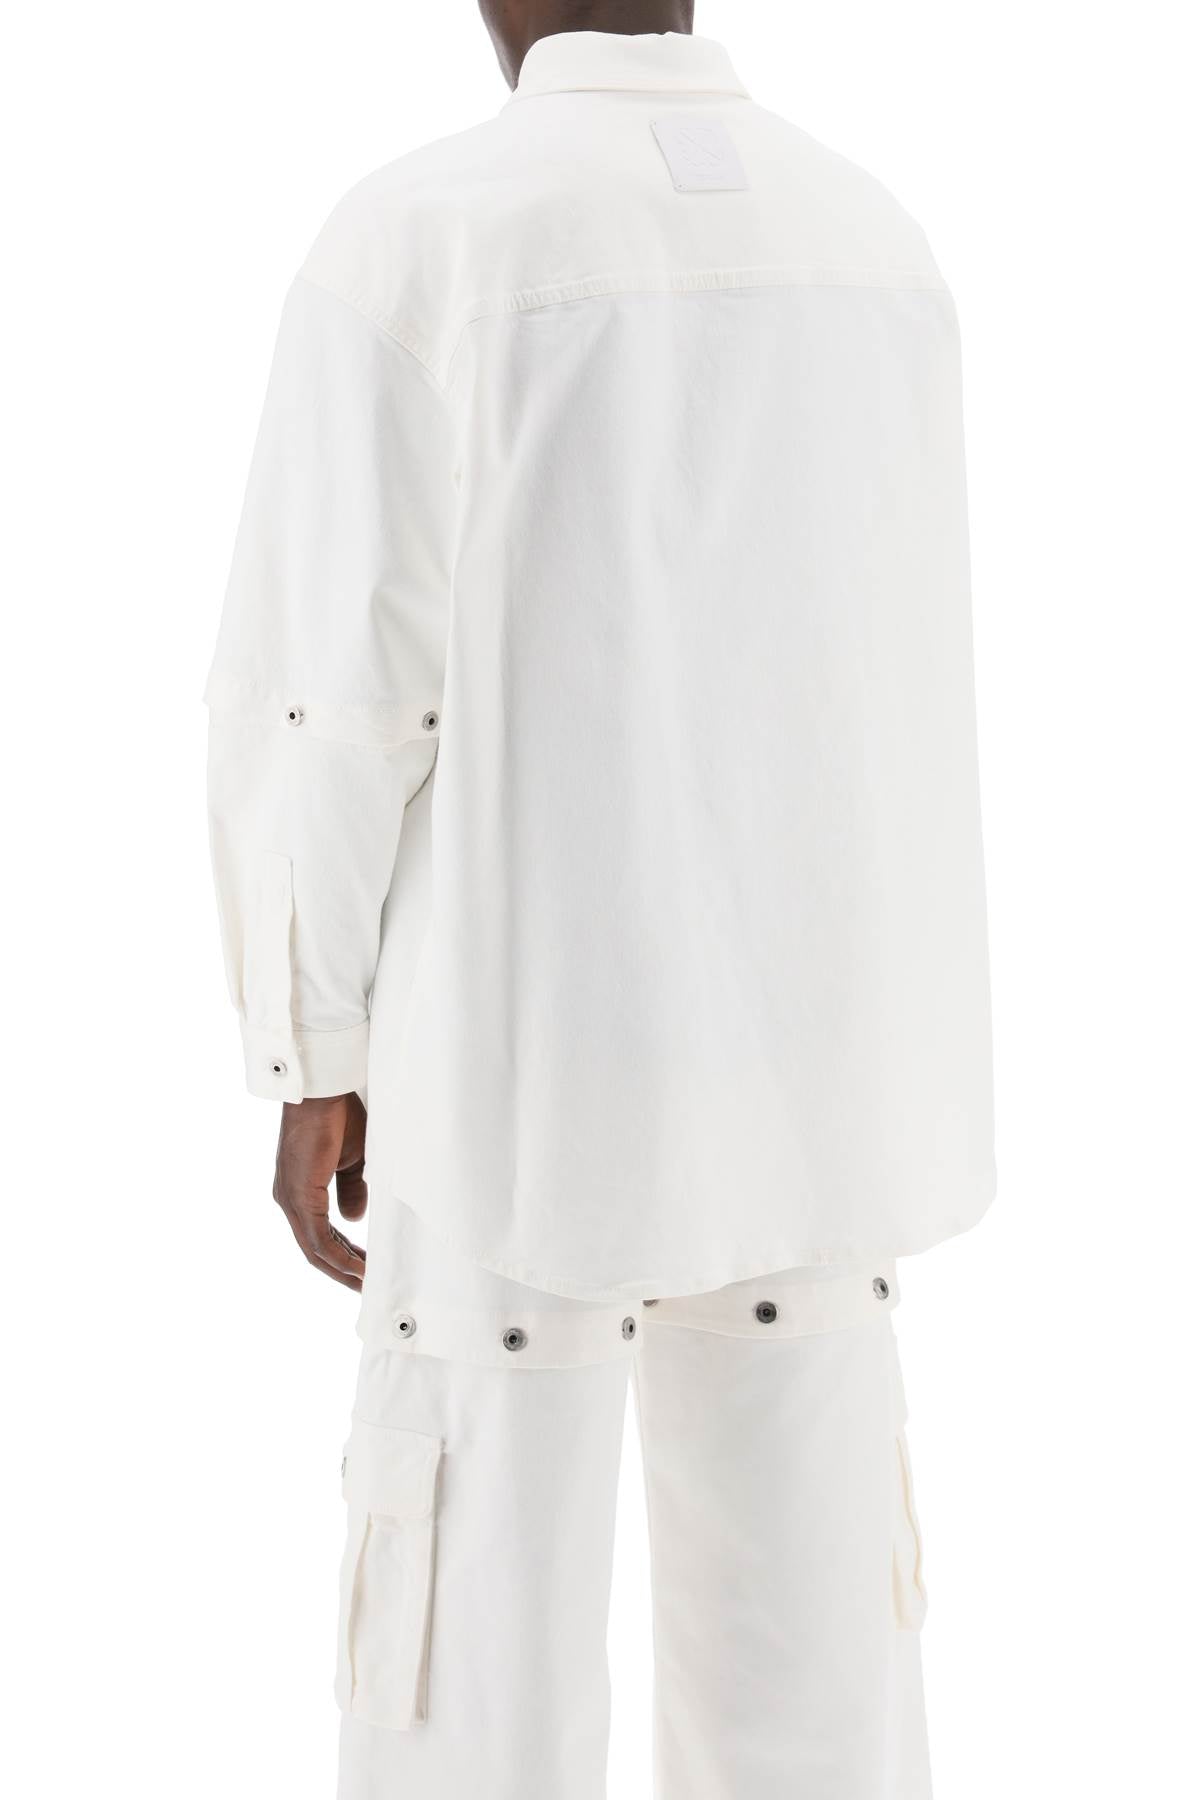 OFF-WHITE 90s Logo Overshirt in Raw White Cotton for men - SS24